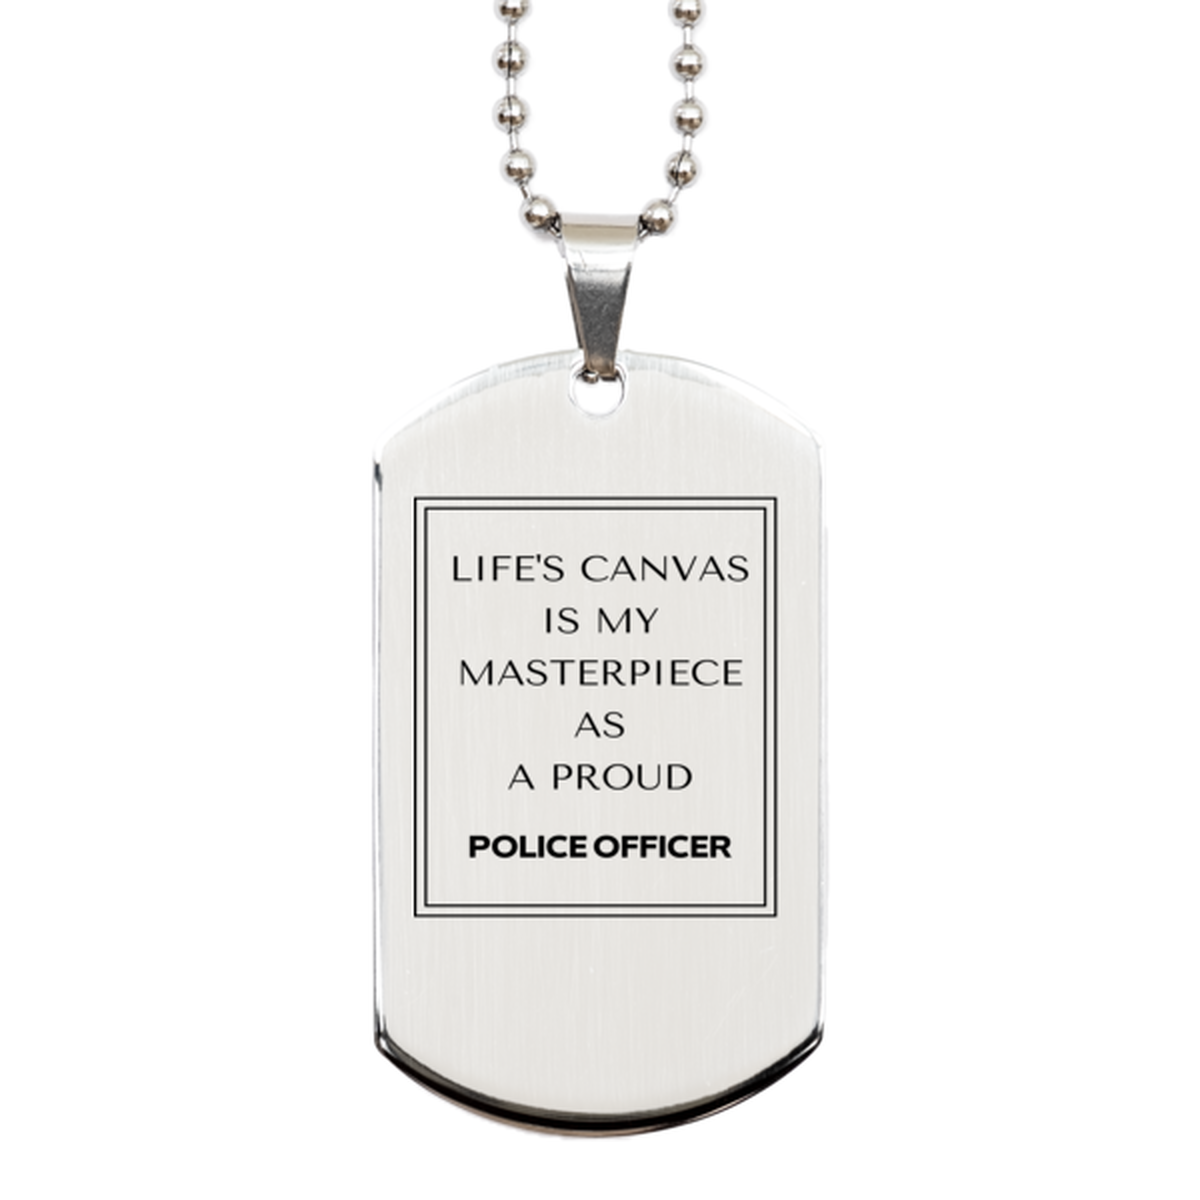 Proud Police Officer Gifts, Life's canvas is my masterpiece, Epic Birthday Christmas Unique Silver Dog Tag For Police Officer, Coworkers, Men, Women, Friends